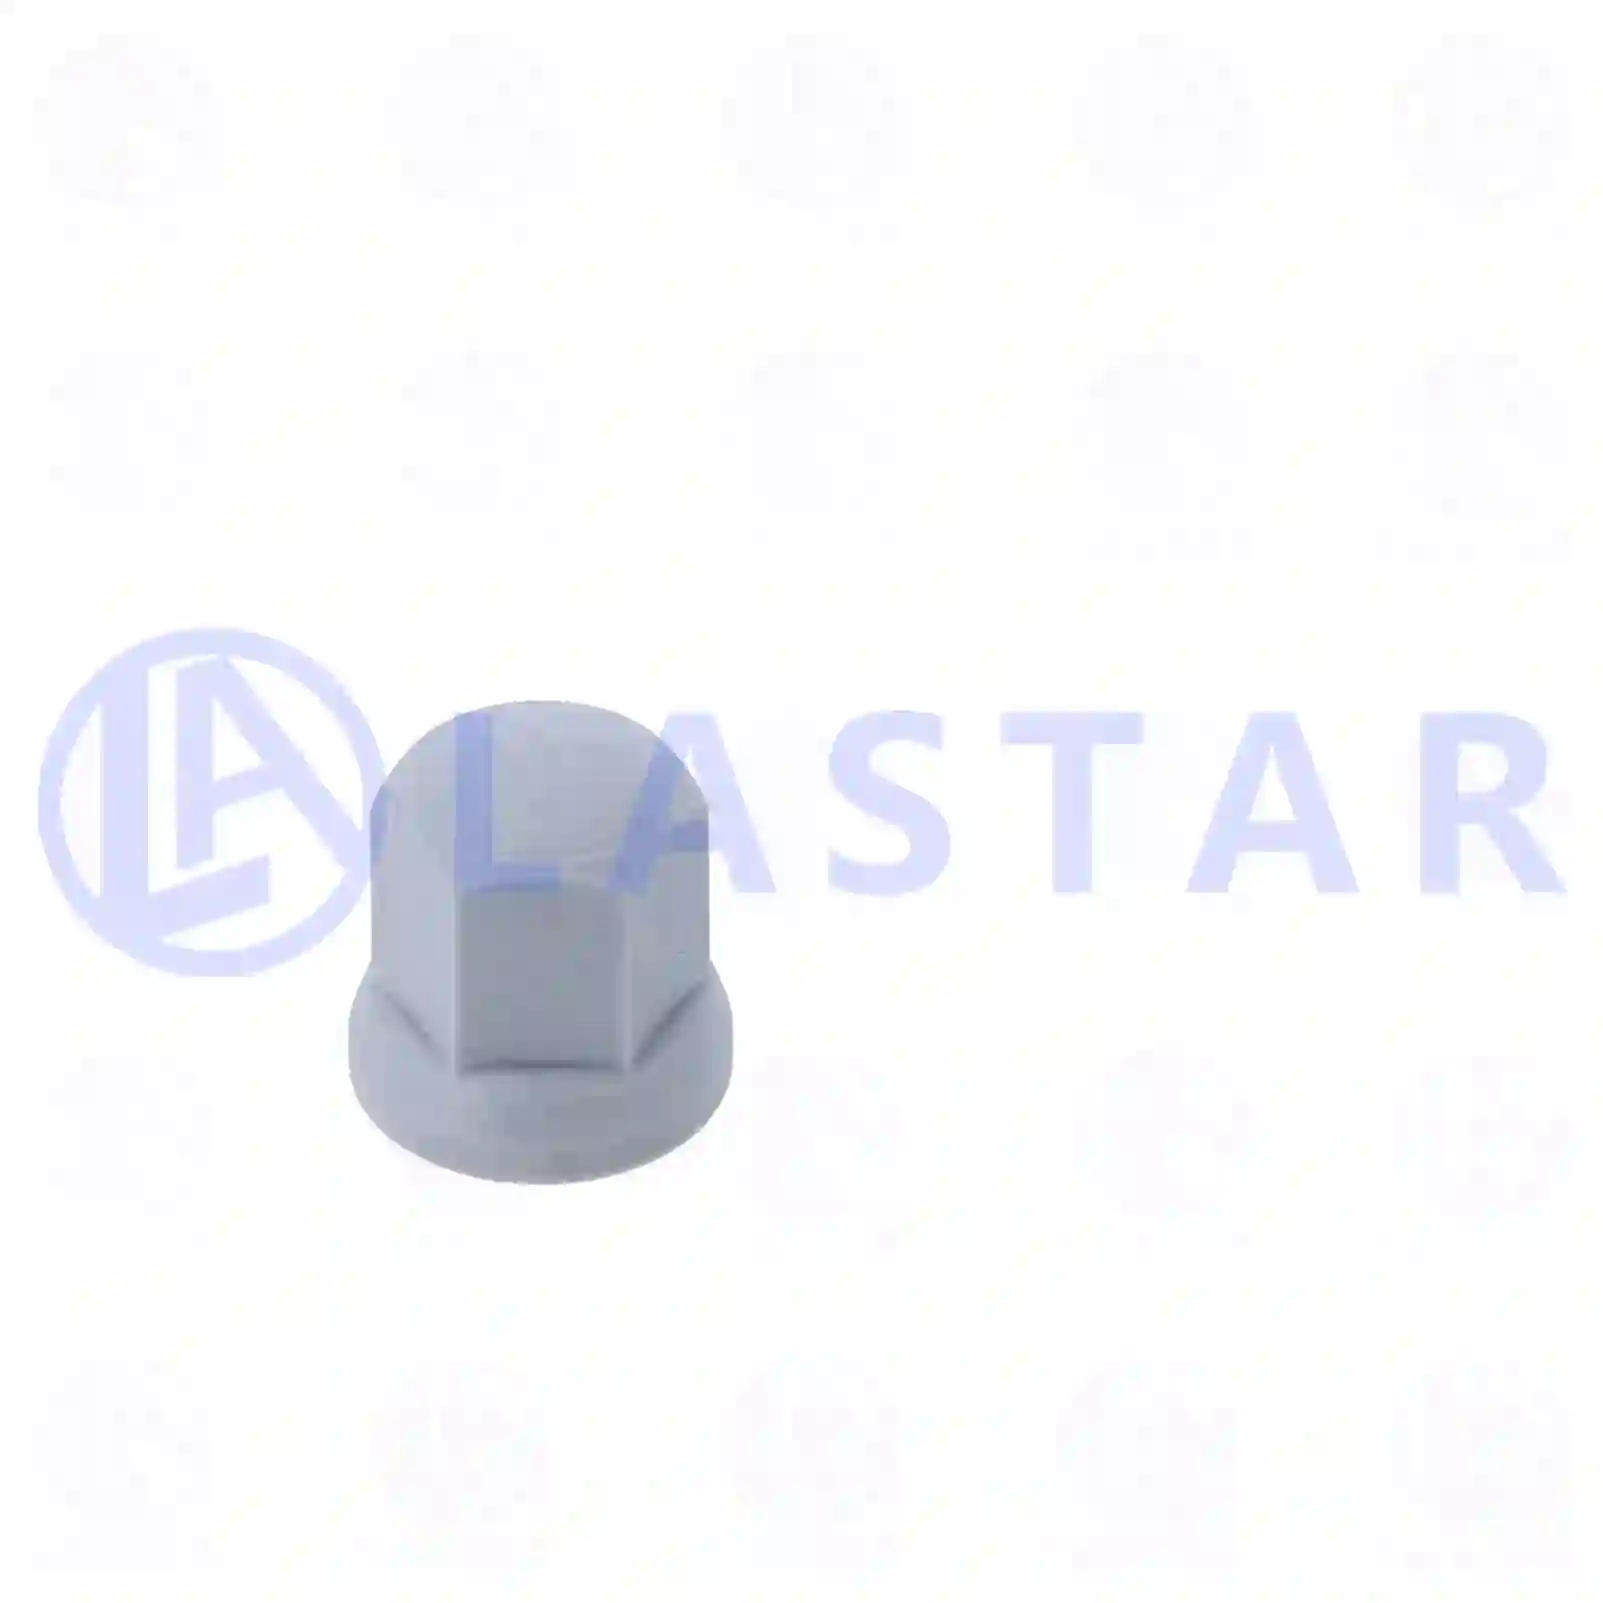 Wheel nut cover, 77726644, 7424424790, 1609675, 20578566, 3943983, ZG41980-0008 ||  77726644 Lastar Spare Part | Truck Spare Parts, Auotomotive Spare Parts Wheel nut cover, 77726644, 7424424790, 1609675, 20578566, 3943983, ZG41980-0008 ||  77726644 Lastar Spare Part | Truck Spare Parts, Auotomotive Spare Parts